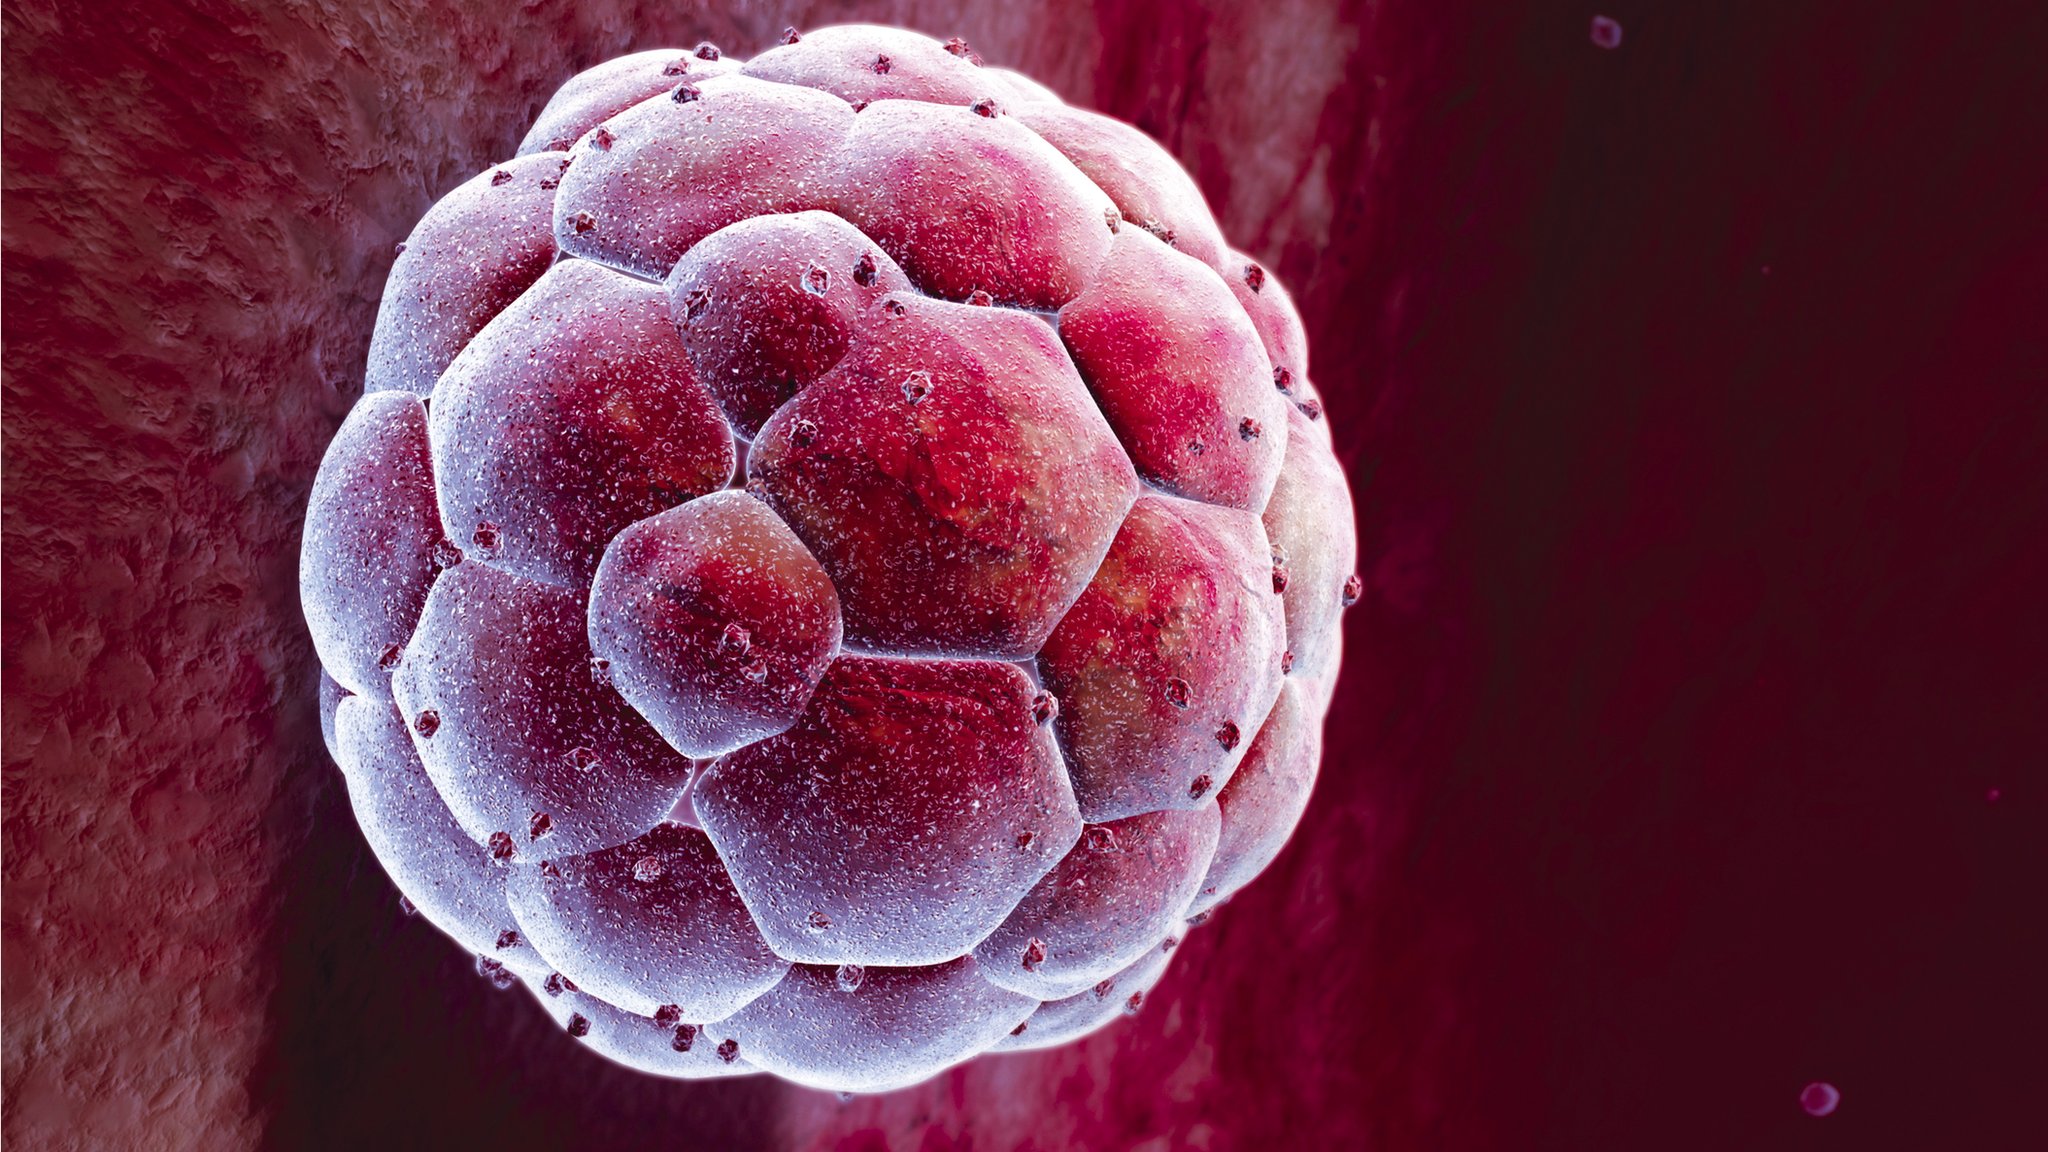 Embryo study shows 'life's first steps'